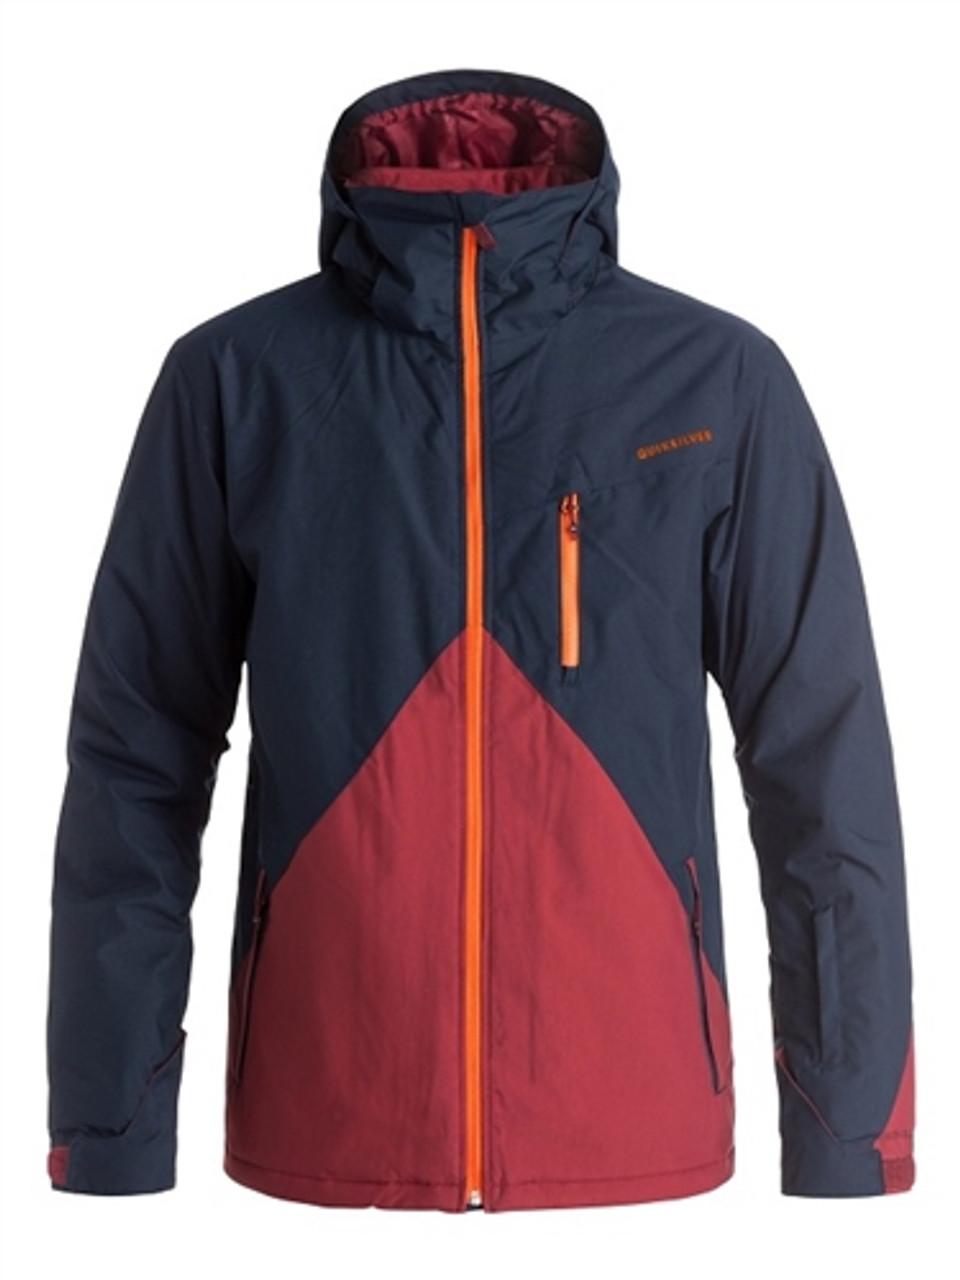 Quiksilver Mission Snow Jacket Black Red